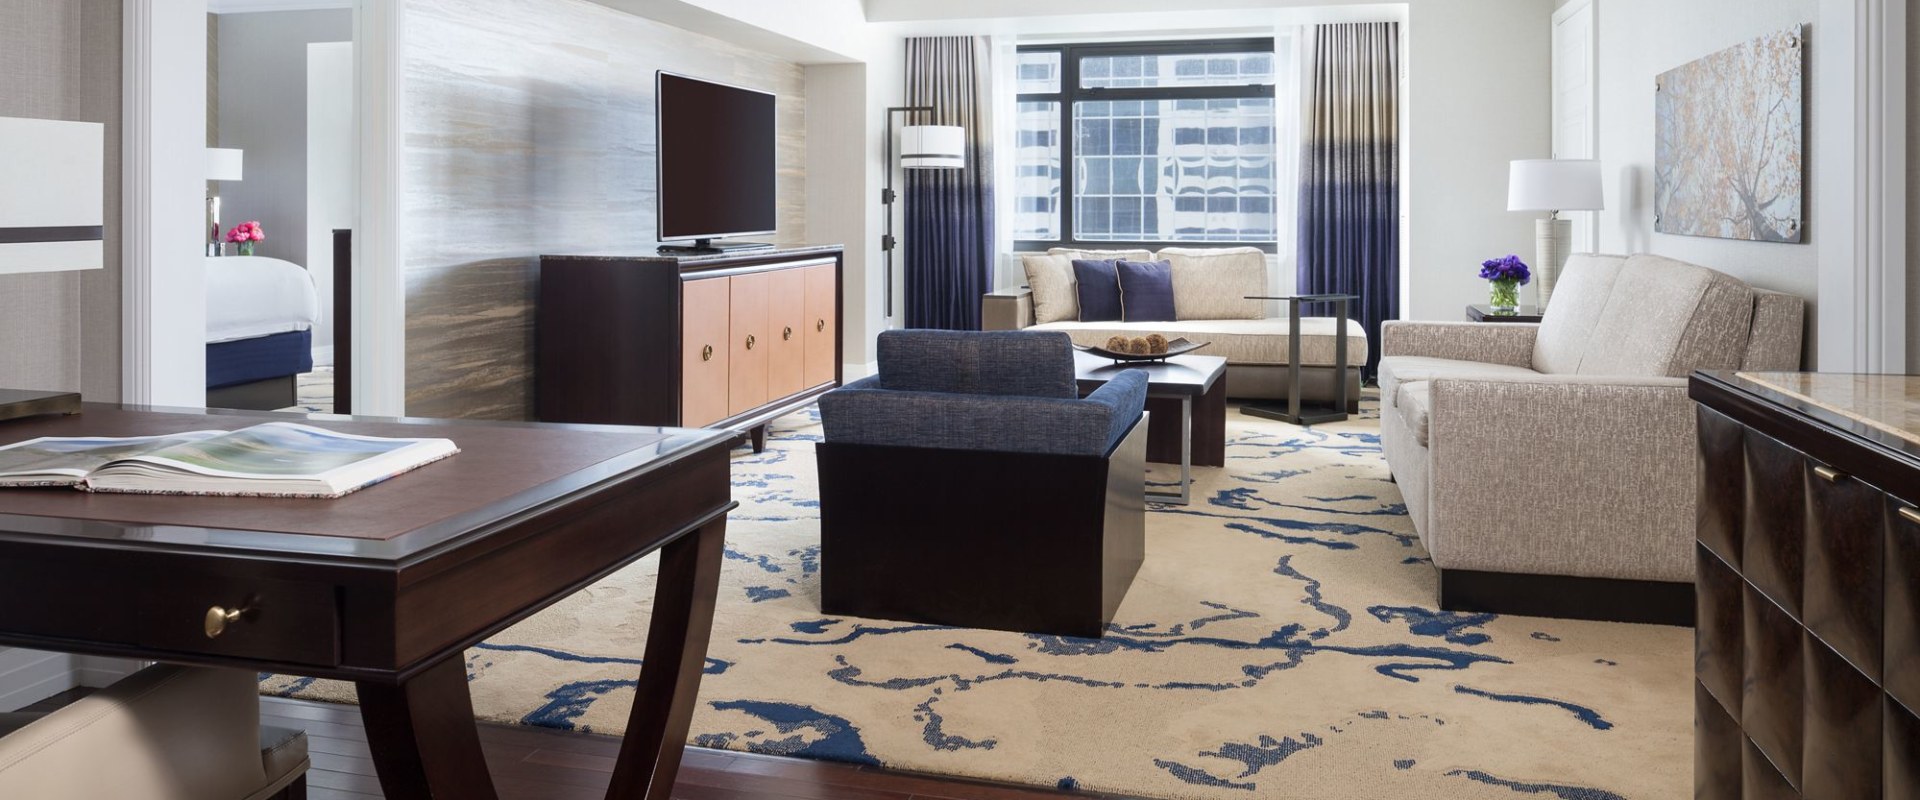 What Types of Services are Available at the Suites in Denver, Colorado?